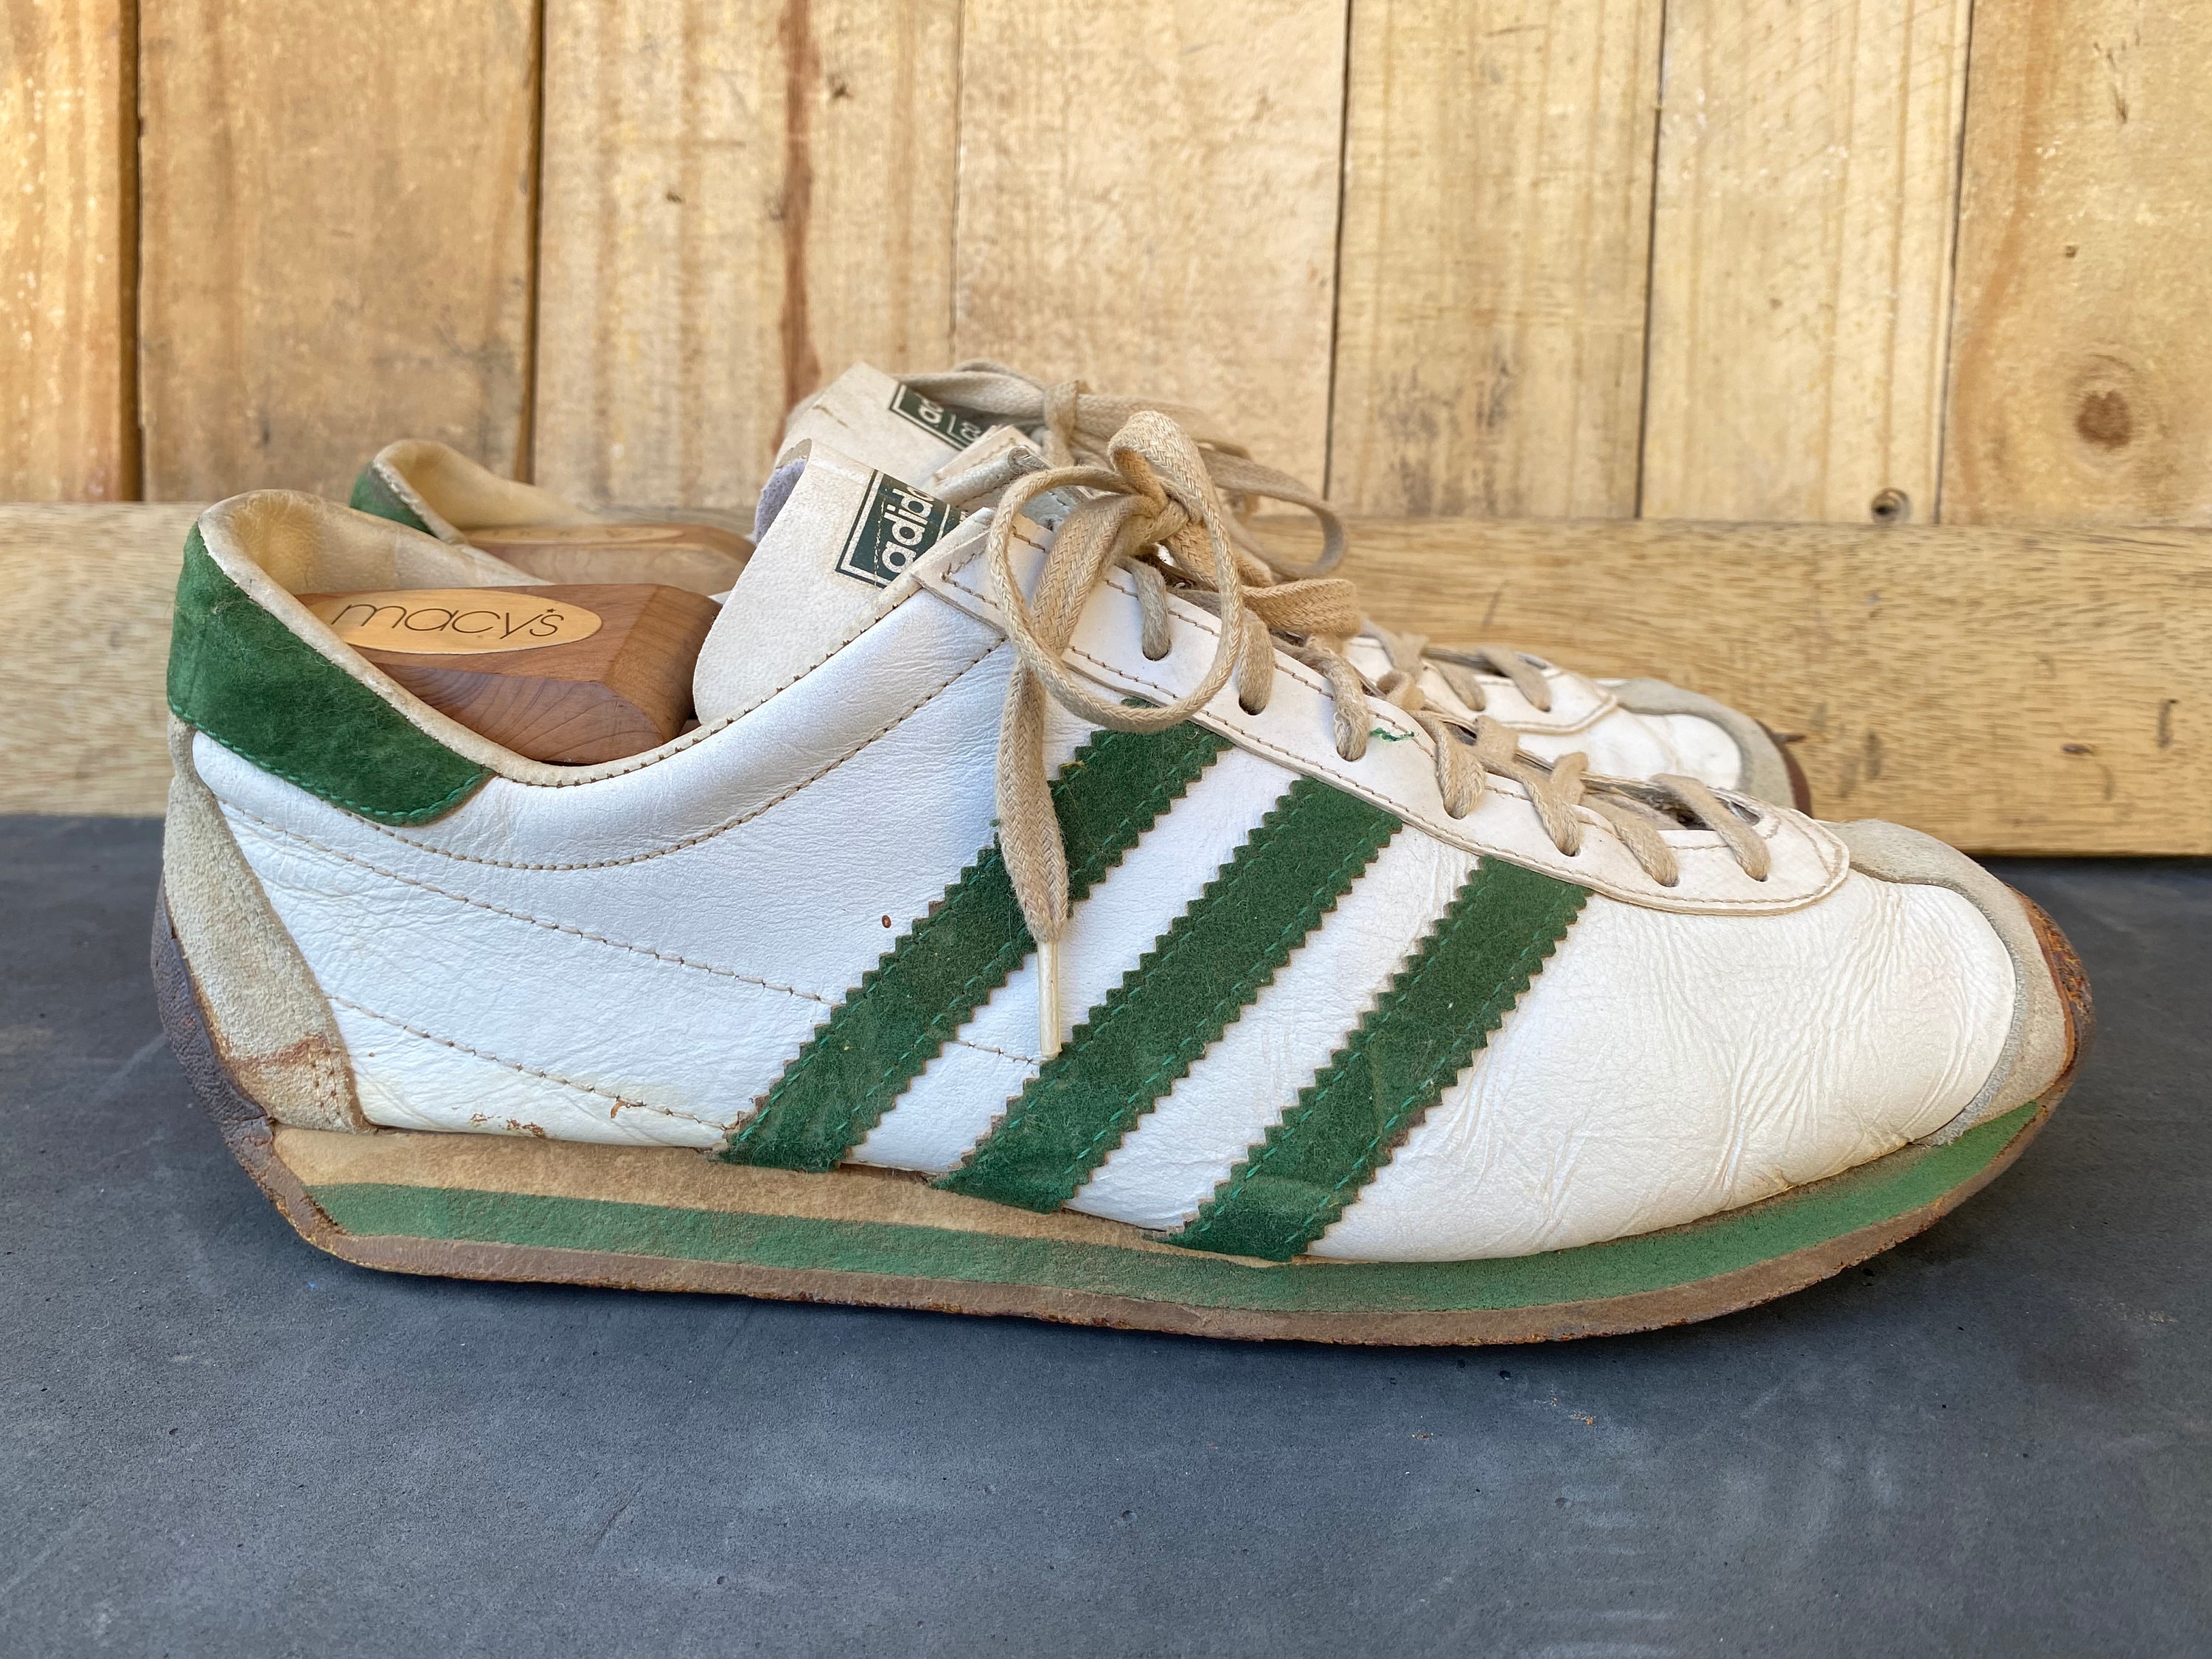 Buy Rare VTG 70s Adidas Country France White & Green Leather